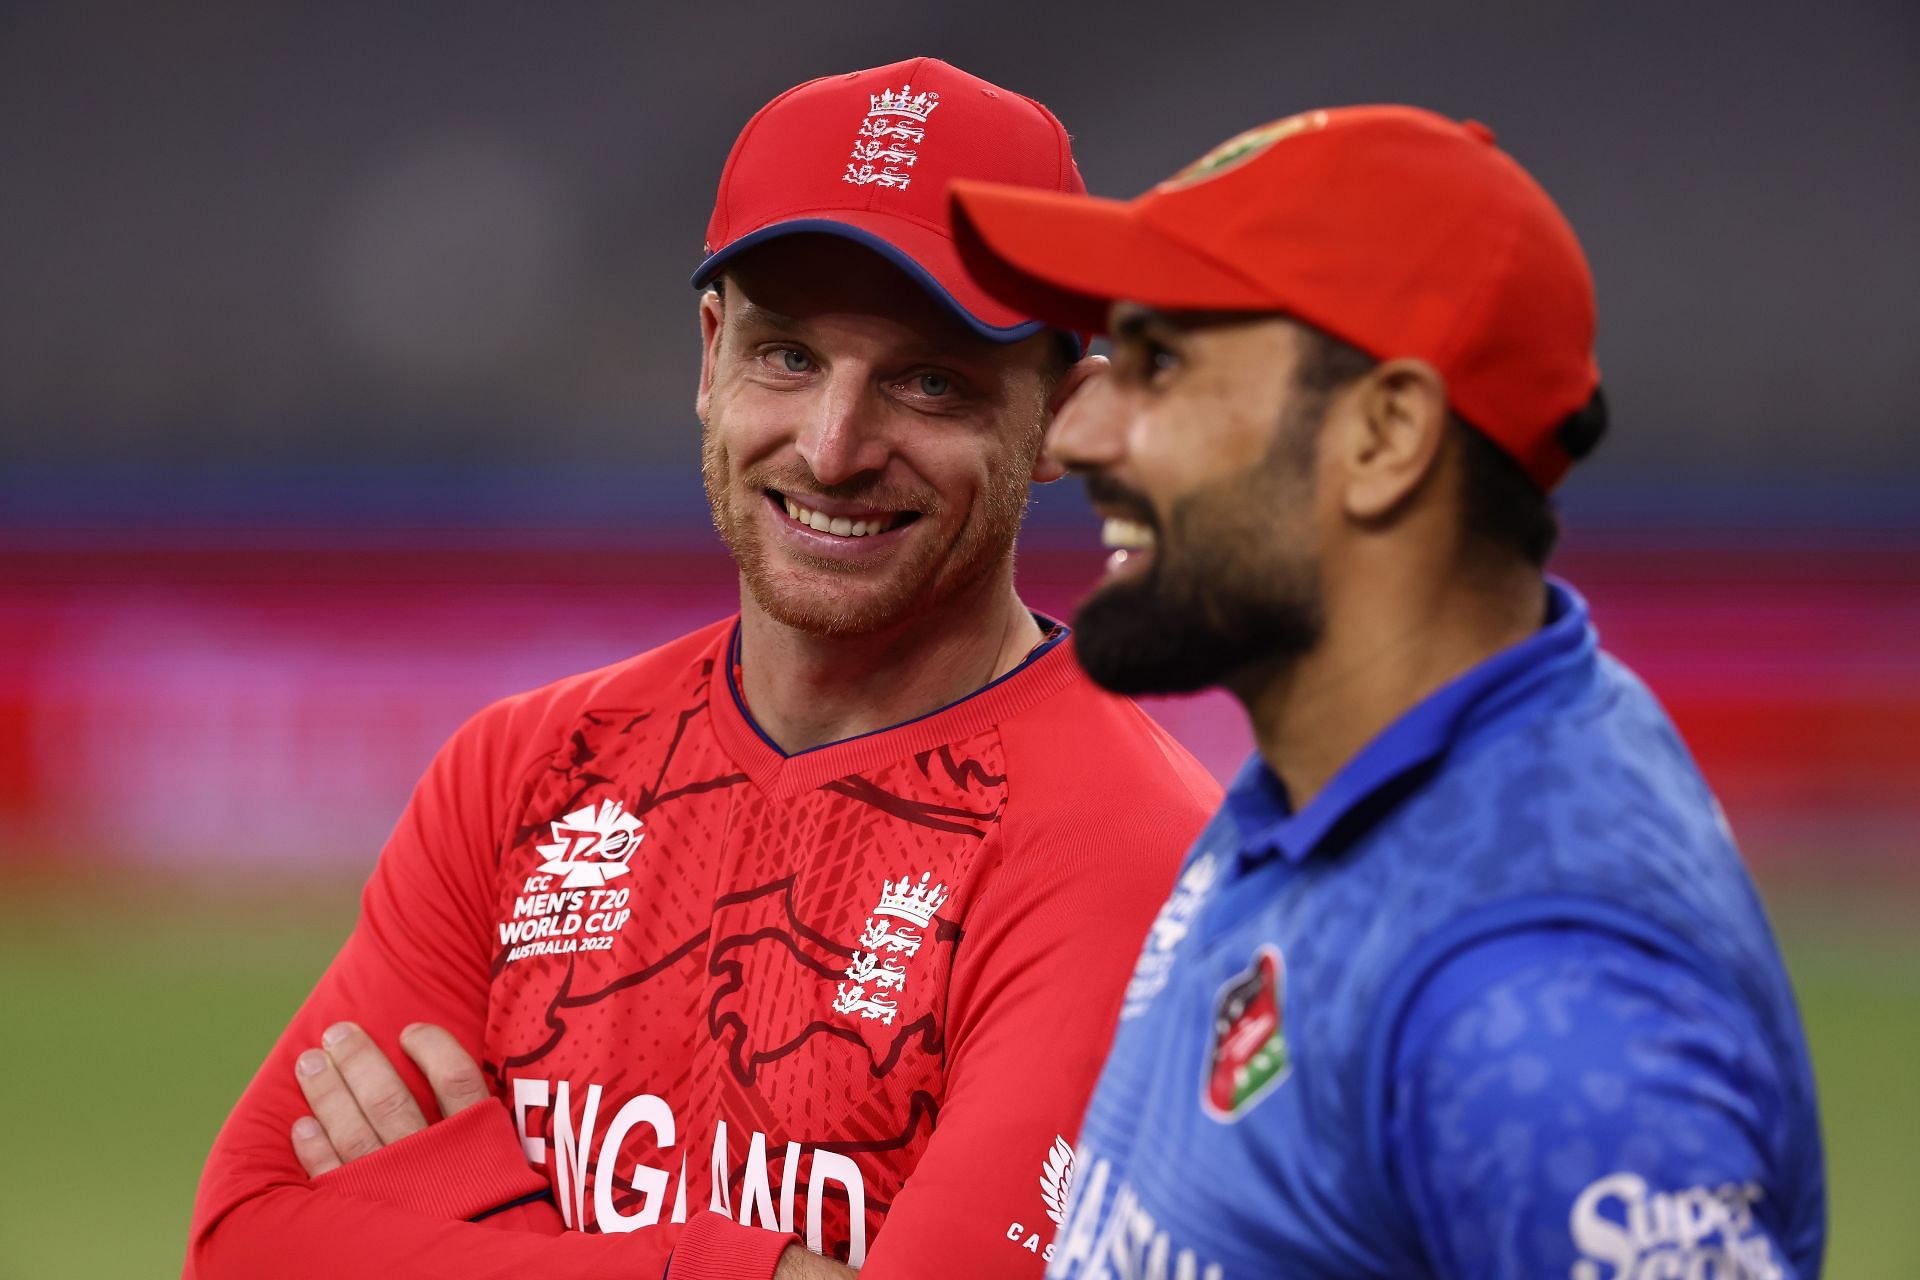 England and Afghanistan have played against each other only in T20 World Cups.